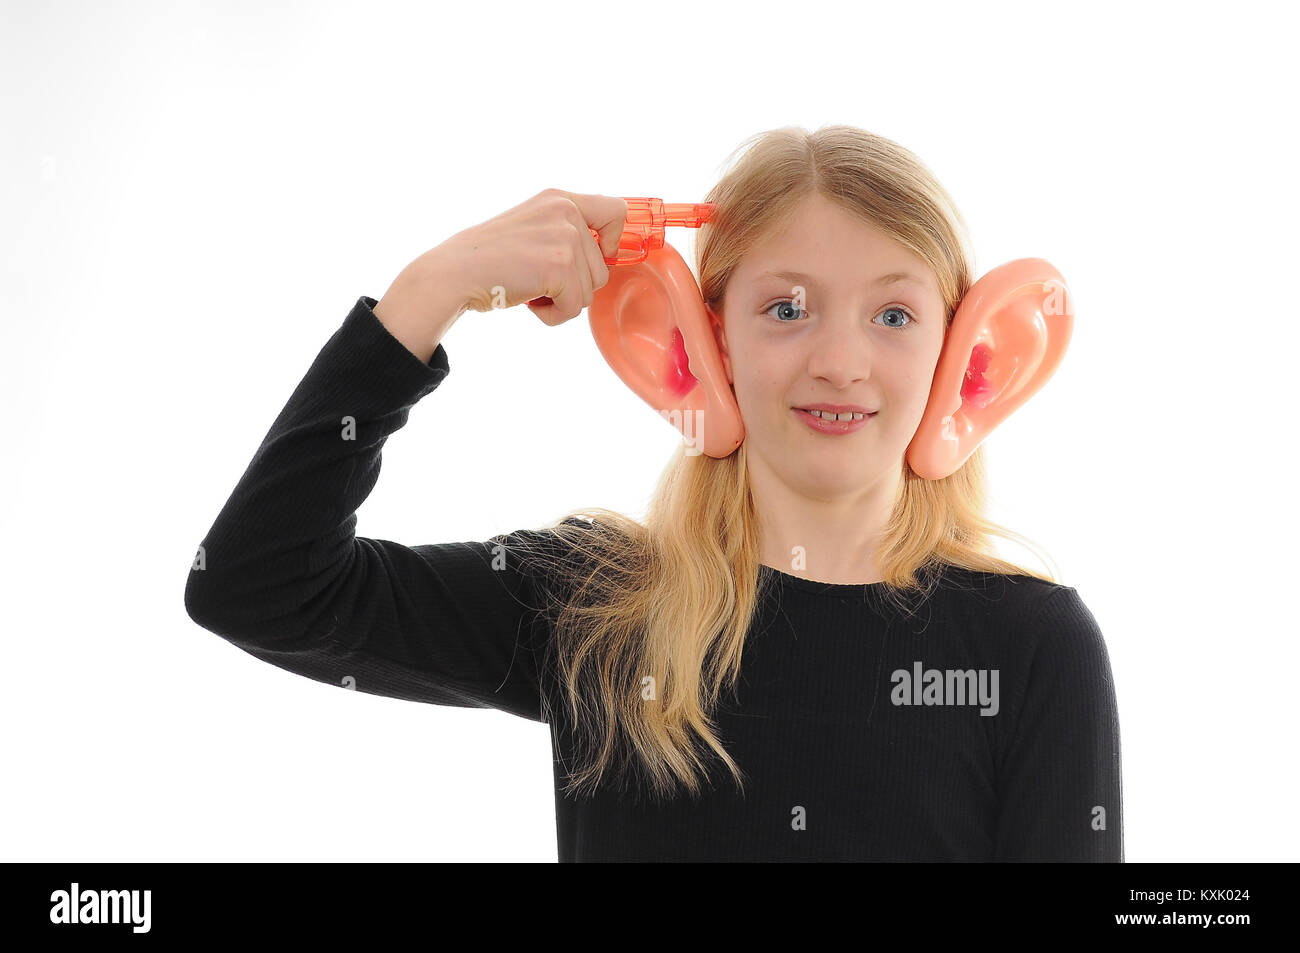 pretty blonde Caucasian girl with large, false ears, shooting herself with a plastic water pistol, isolated on white Stock Photo